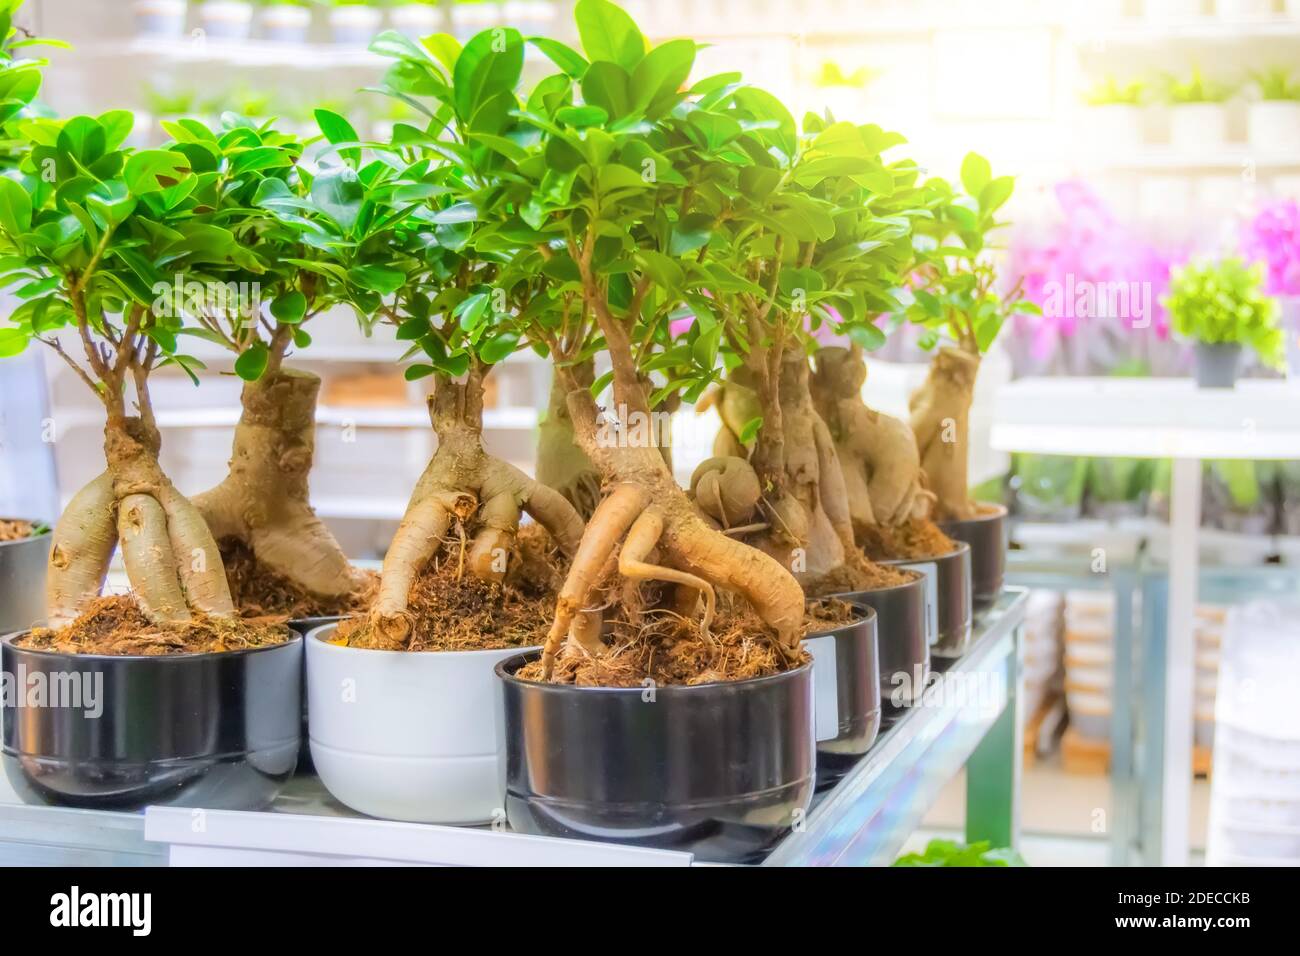 Ficus microcarpa on store shelves sale of indoor plants Stock Photo